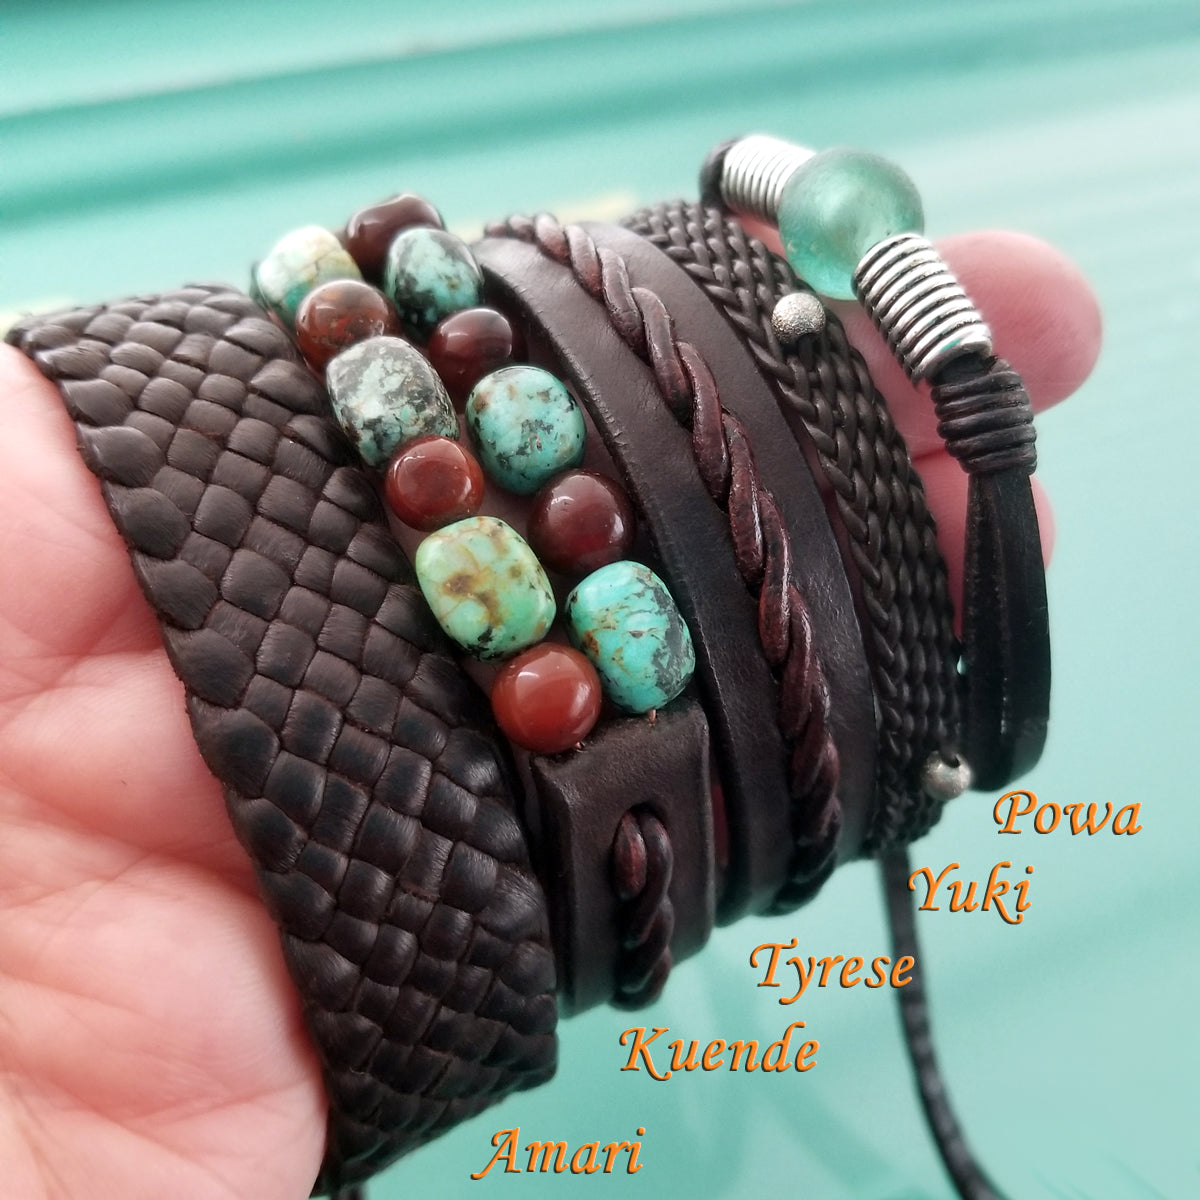  Kuende African Turquoise & Red Carnelian Beaded Braided Leather Bracelet with Tyrese Stair Step Braided Leather Bracelet, Amari Braided Leather Bracelet, Yuki Braided Leather Bracelet, and Powa African Recycled Glass Bead Leather Cord Adjustable Bracelet